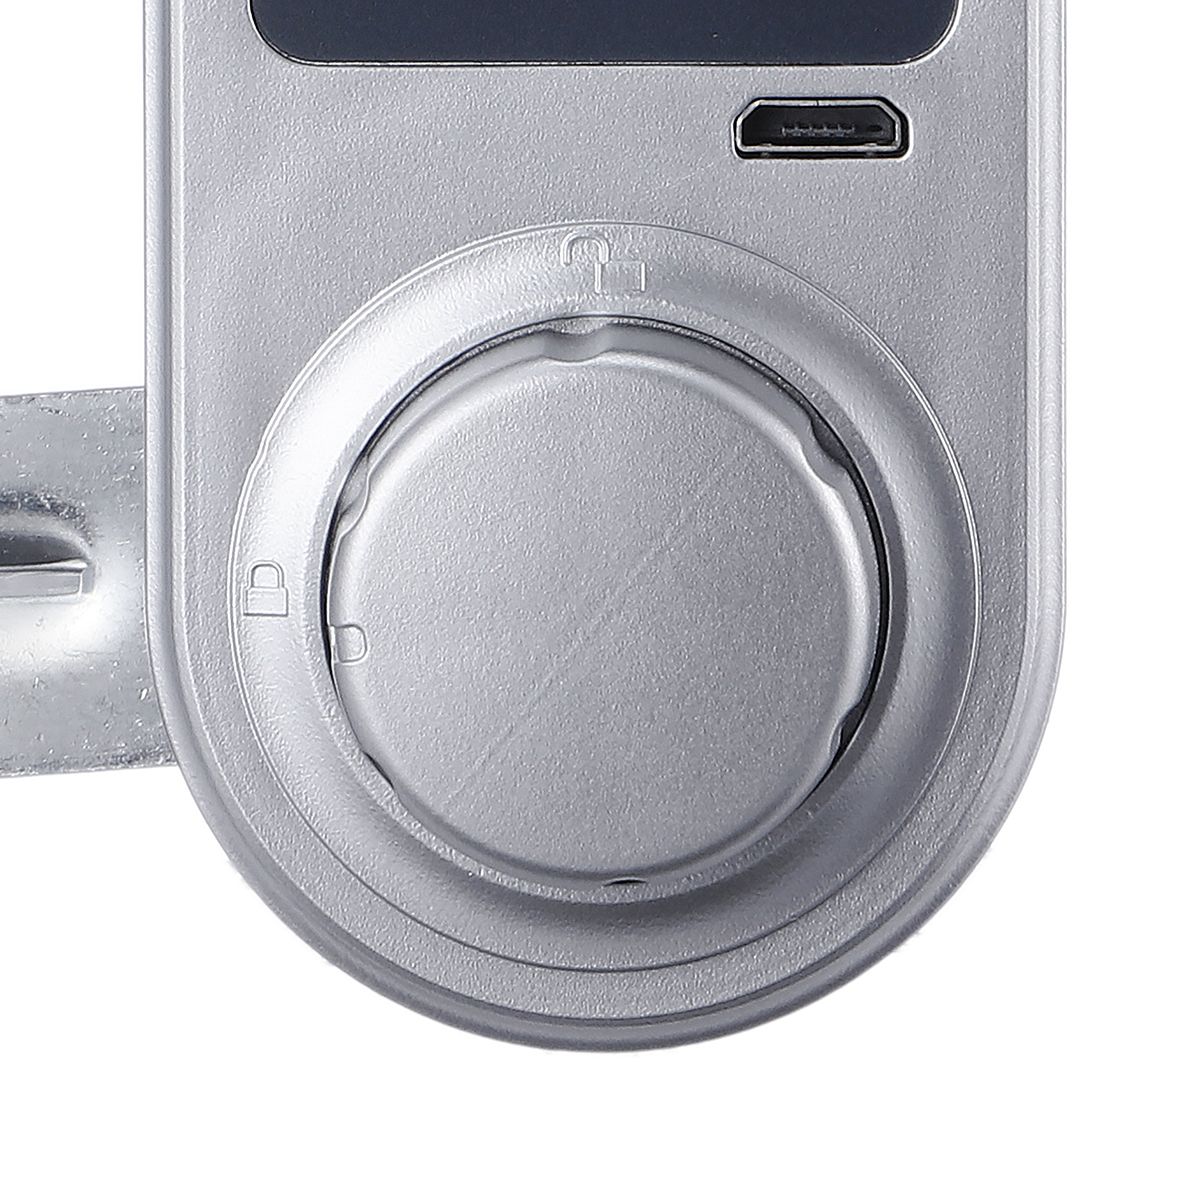 Keyless-Cabinet-Door-Drawer-Lock-Battery-Power-Office-Home-Safety-Security-Code-1628756